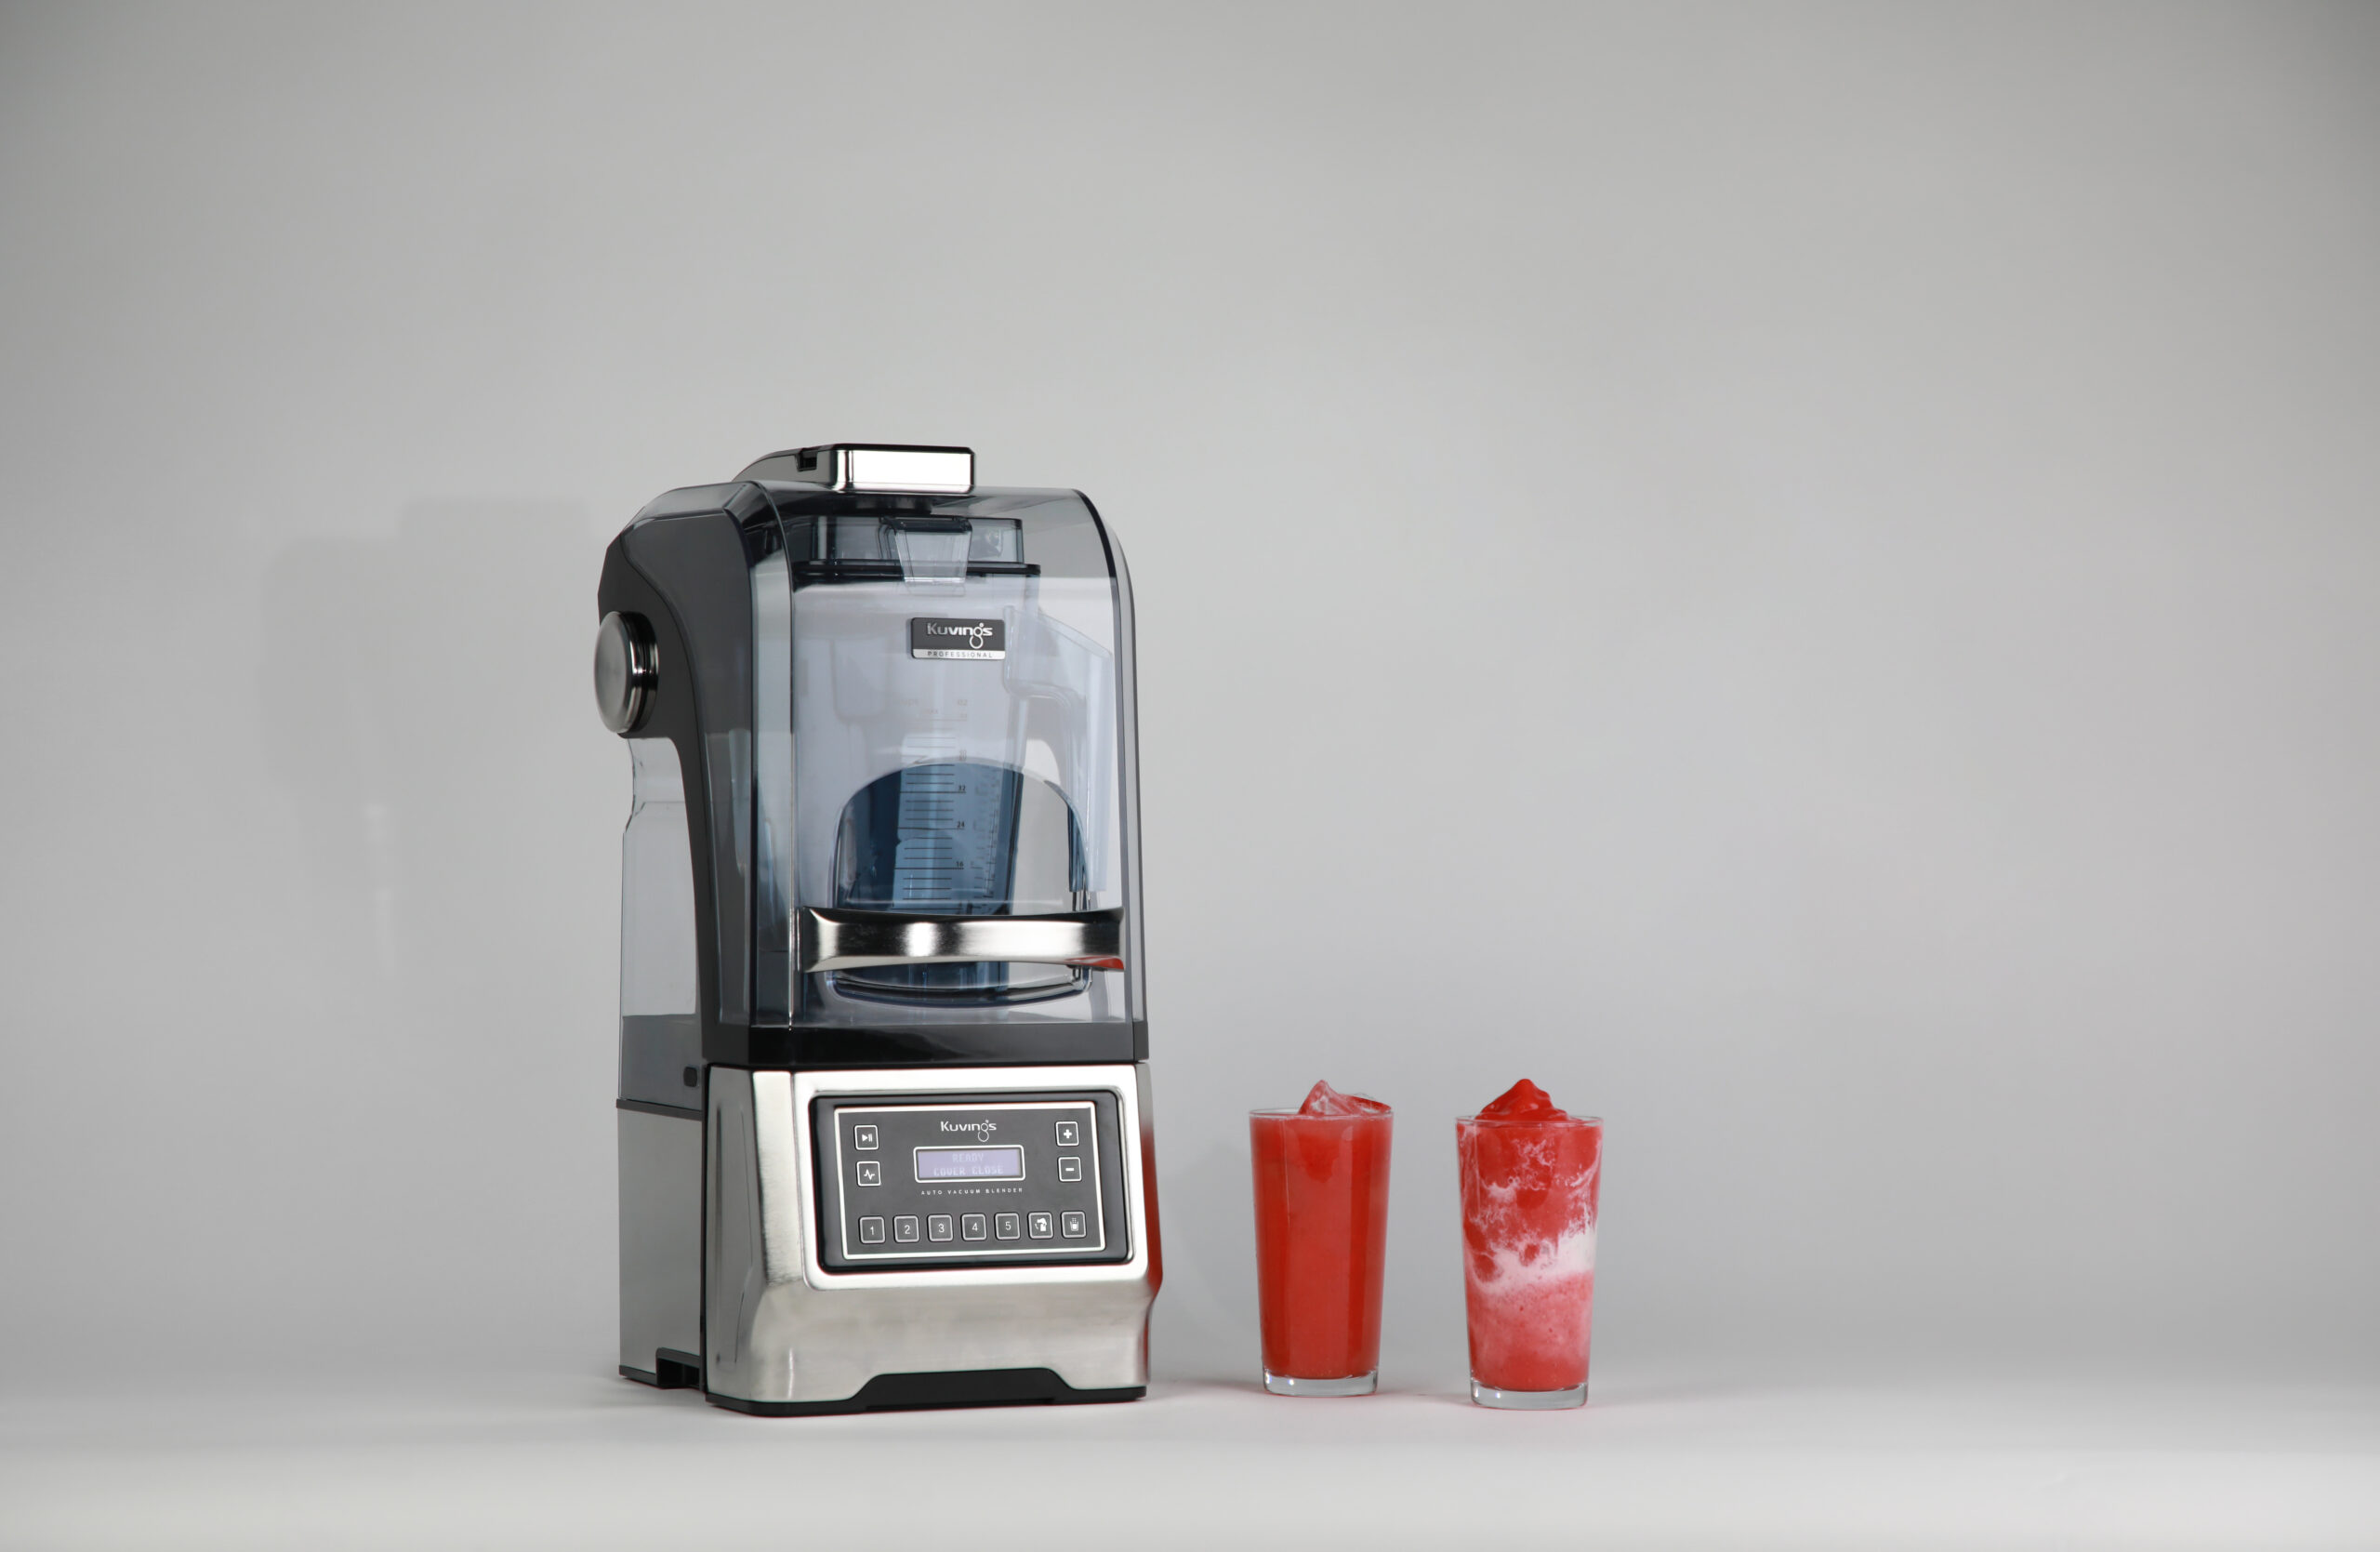 Kuvings unveils worlds first Commercial Blender with automatic opening and closing function ahead of